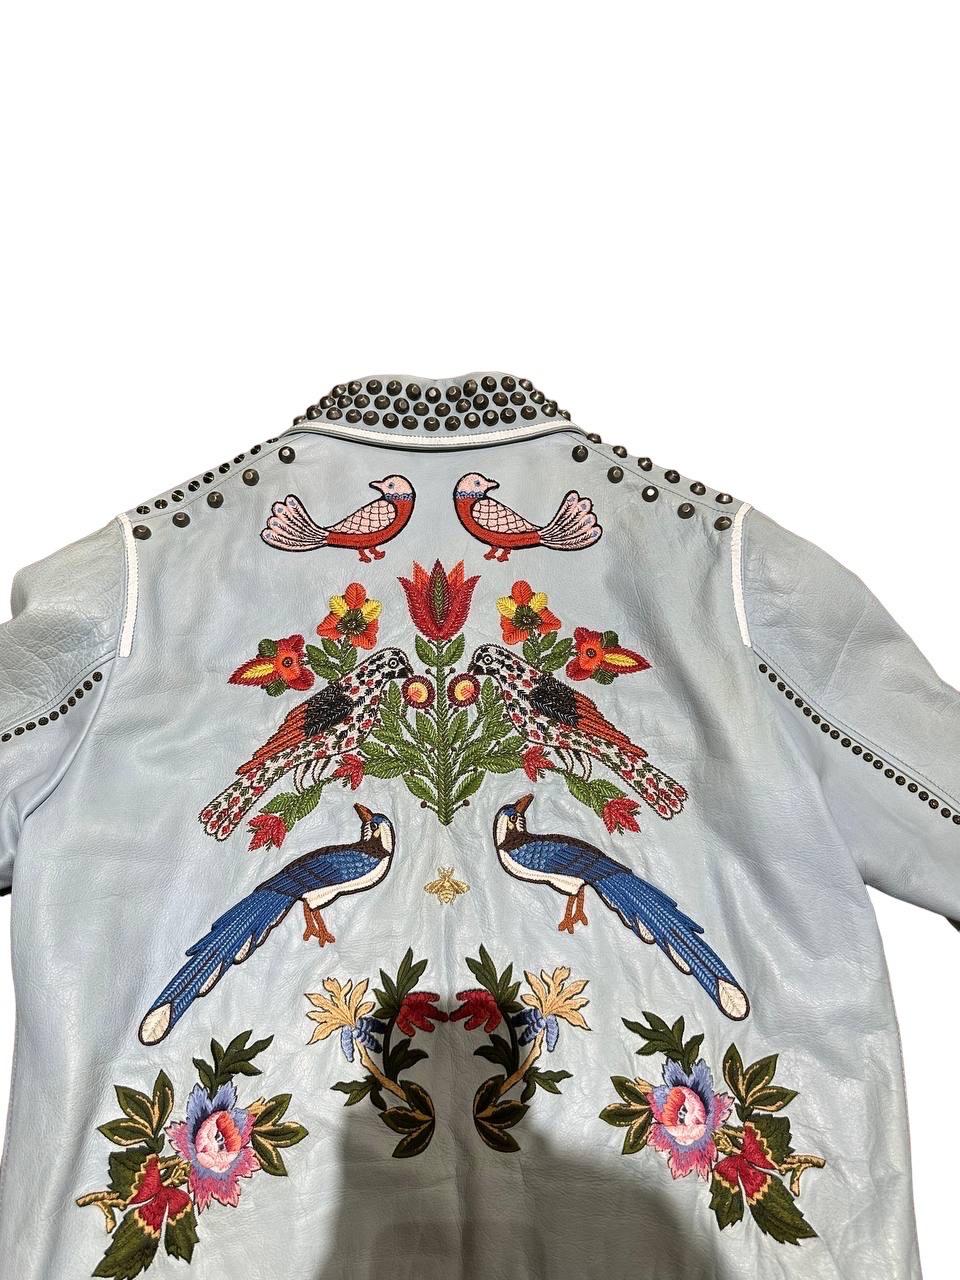 Gucci Leather Jacket Light Blue Floreal Embroidery In Good Condition For Sale In Torre Del Greco, IT